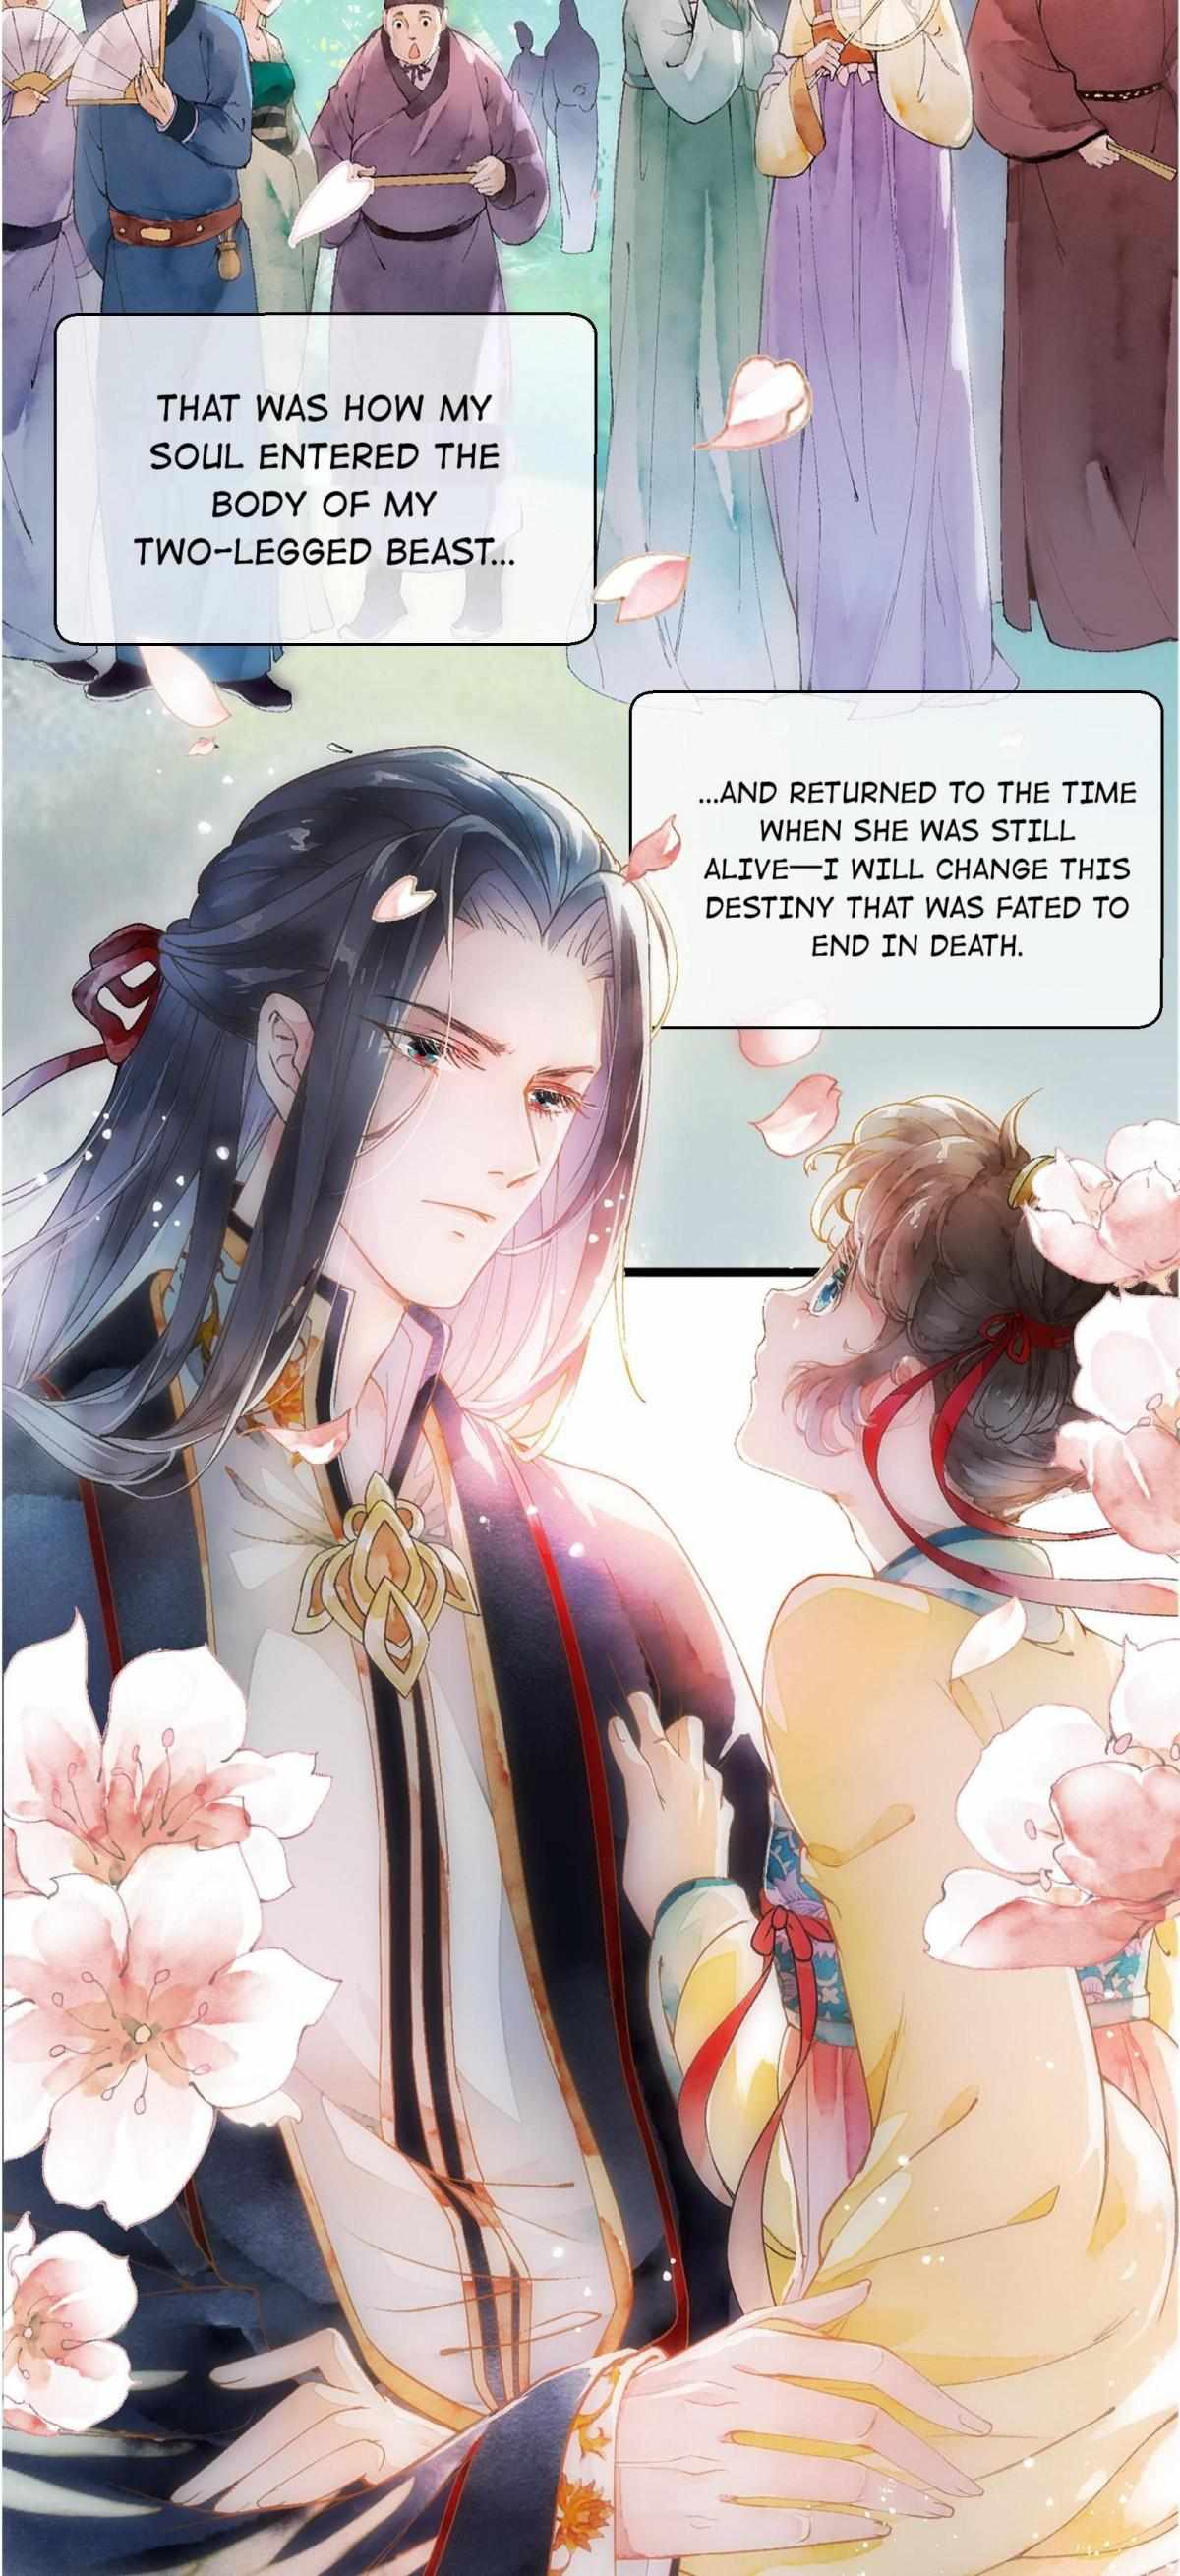 Fantasy of the Buried Beauty: Lihua & Liancheng - chapter 3.2 - #6